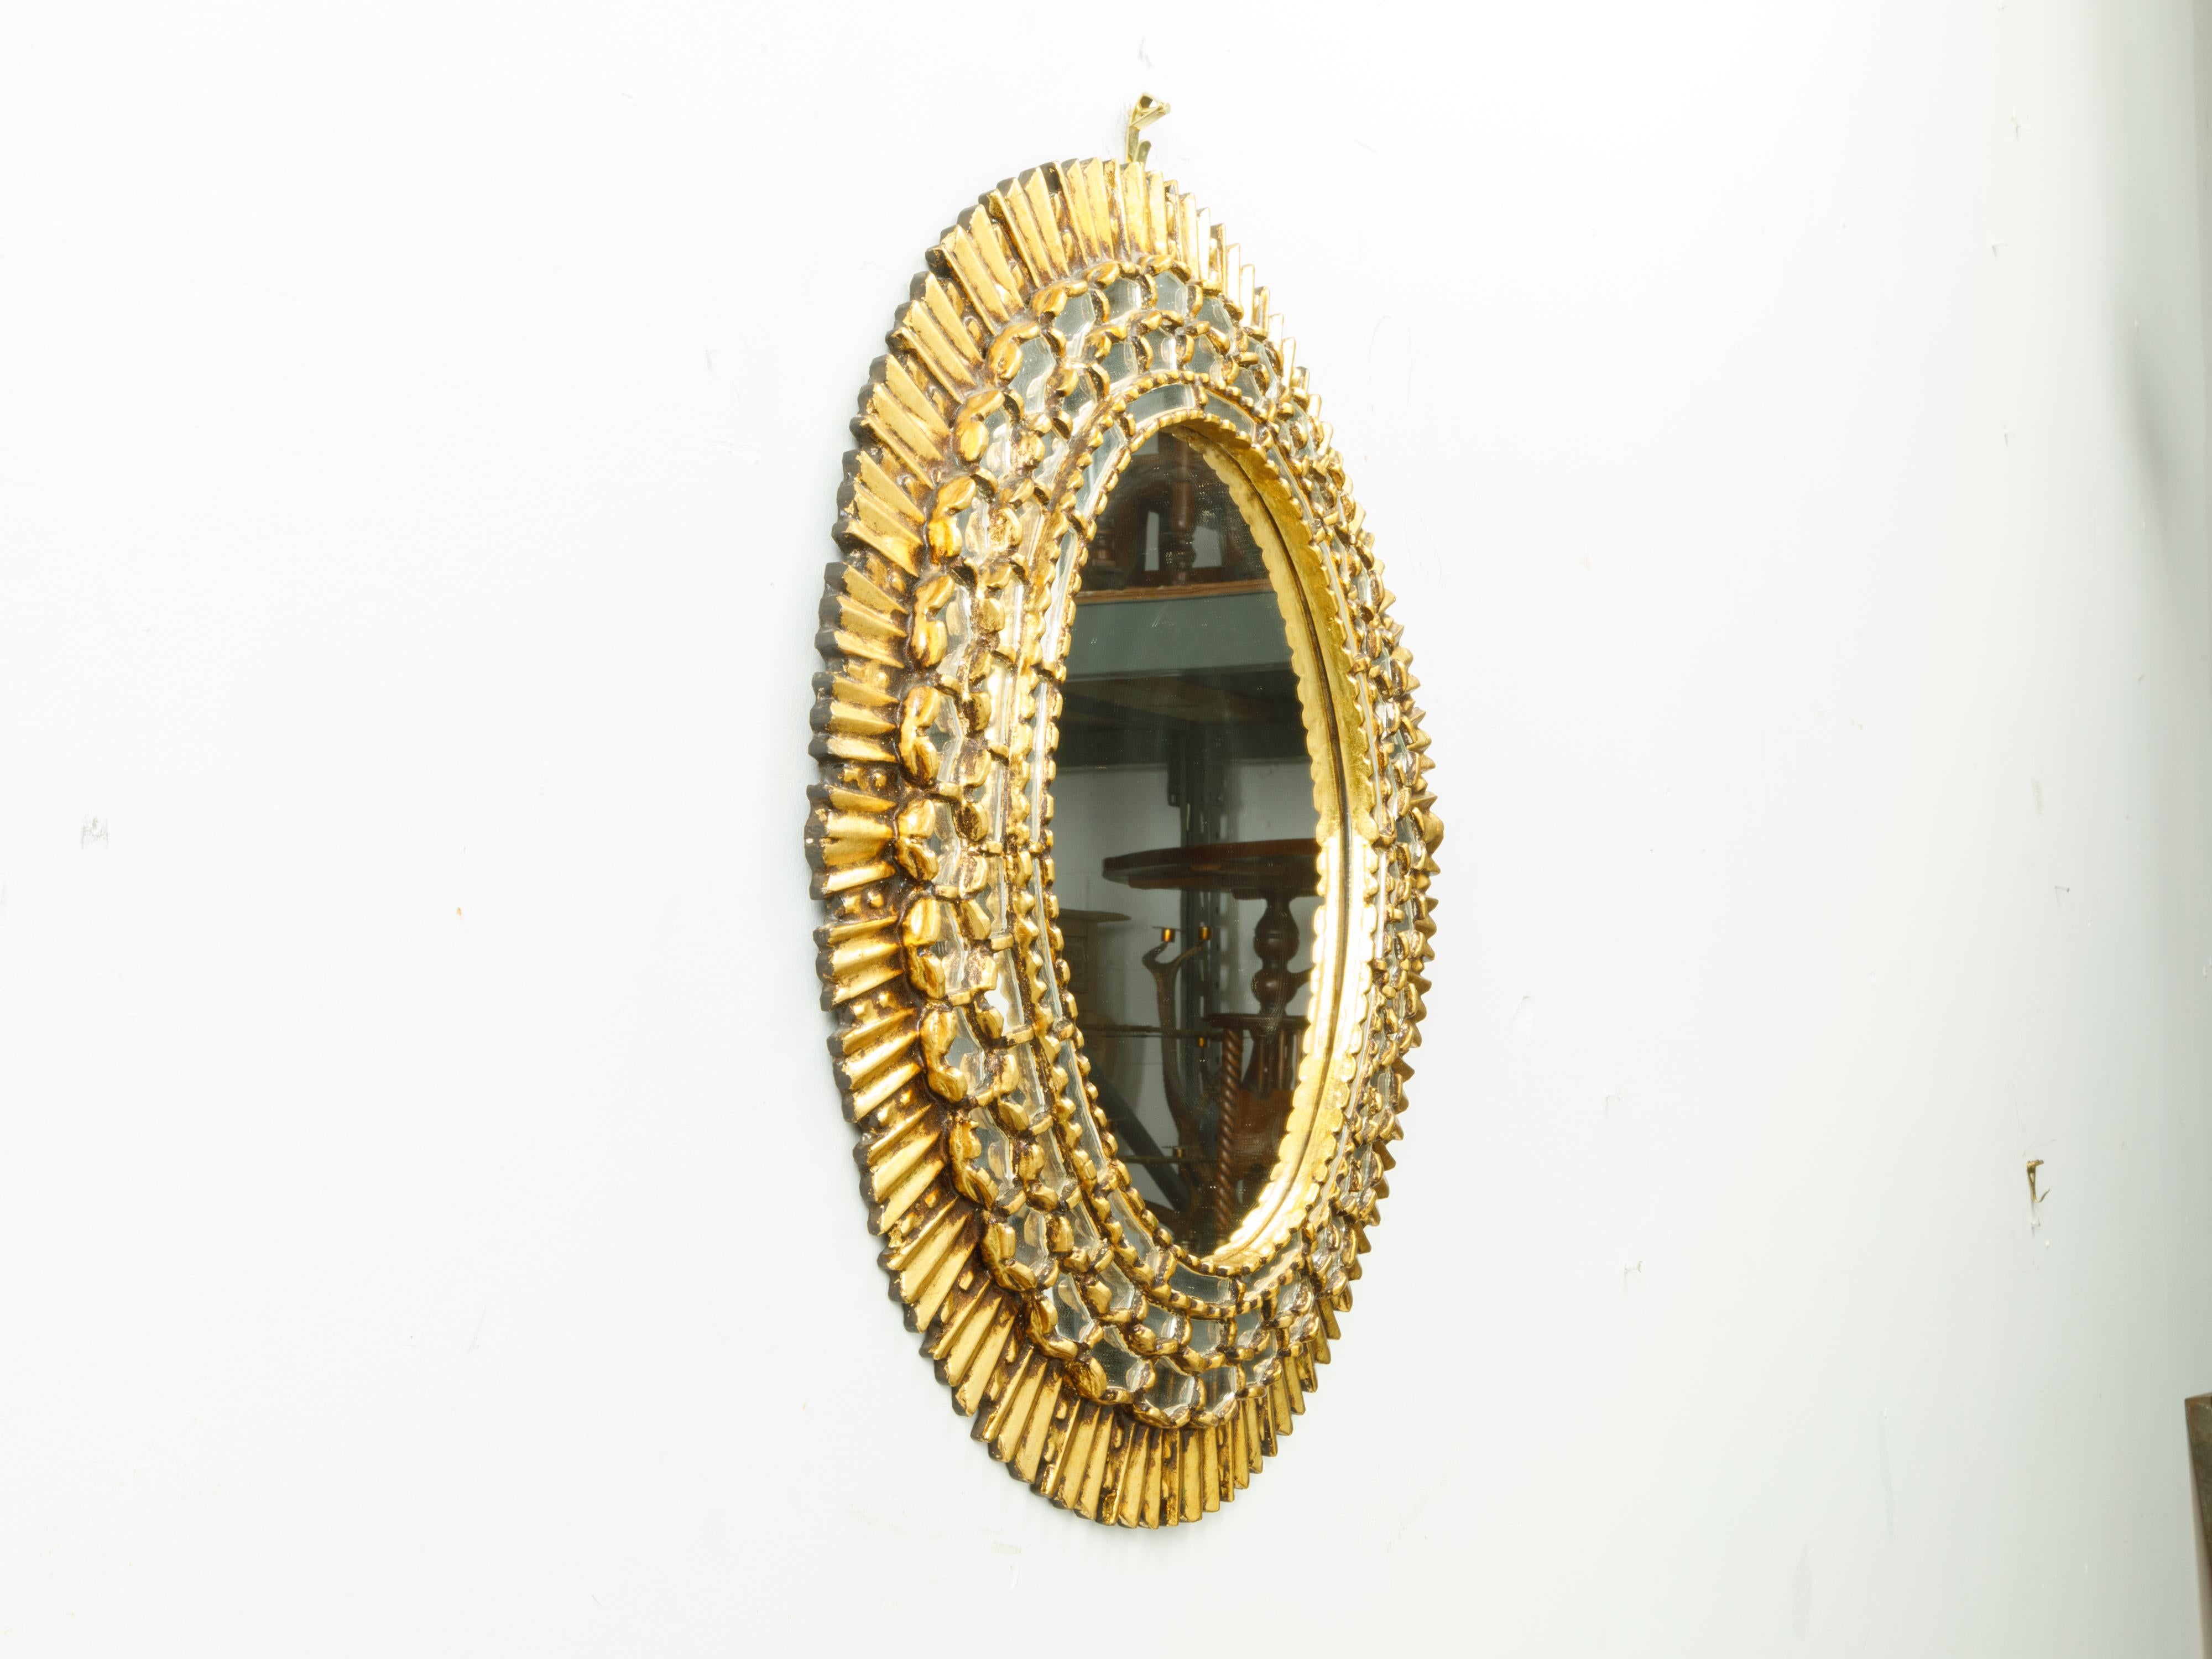 French 1960s Oval Pareclose Sunburst Mirror with Honeycomb Patterns For Sale 1